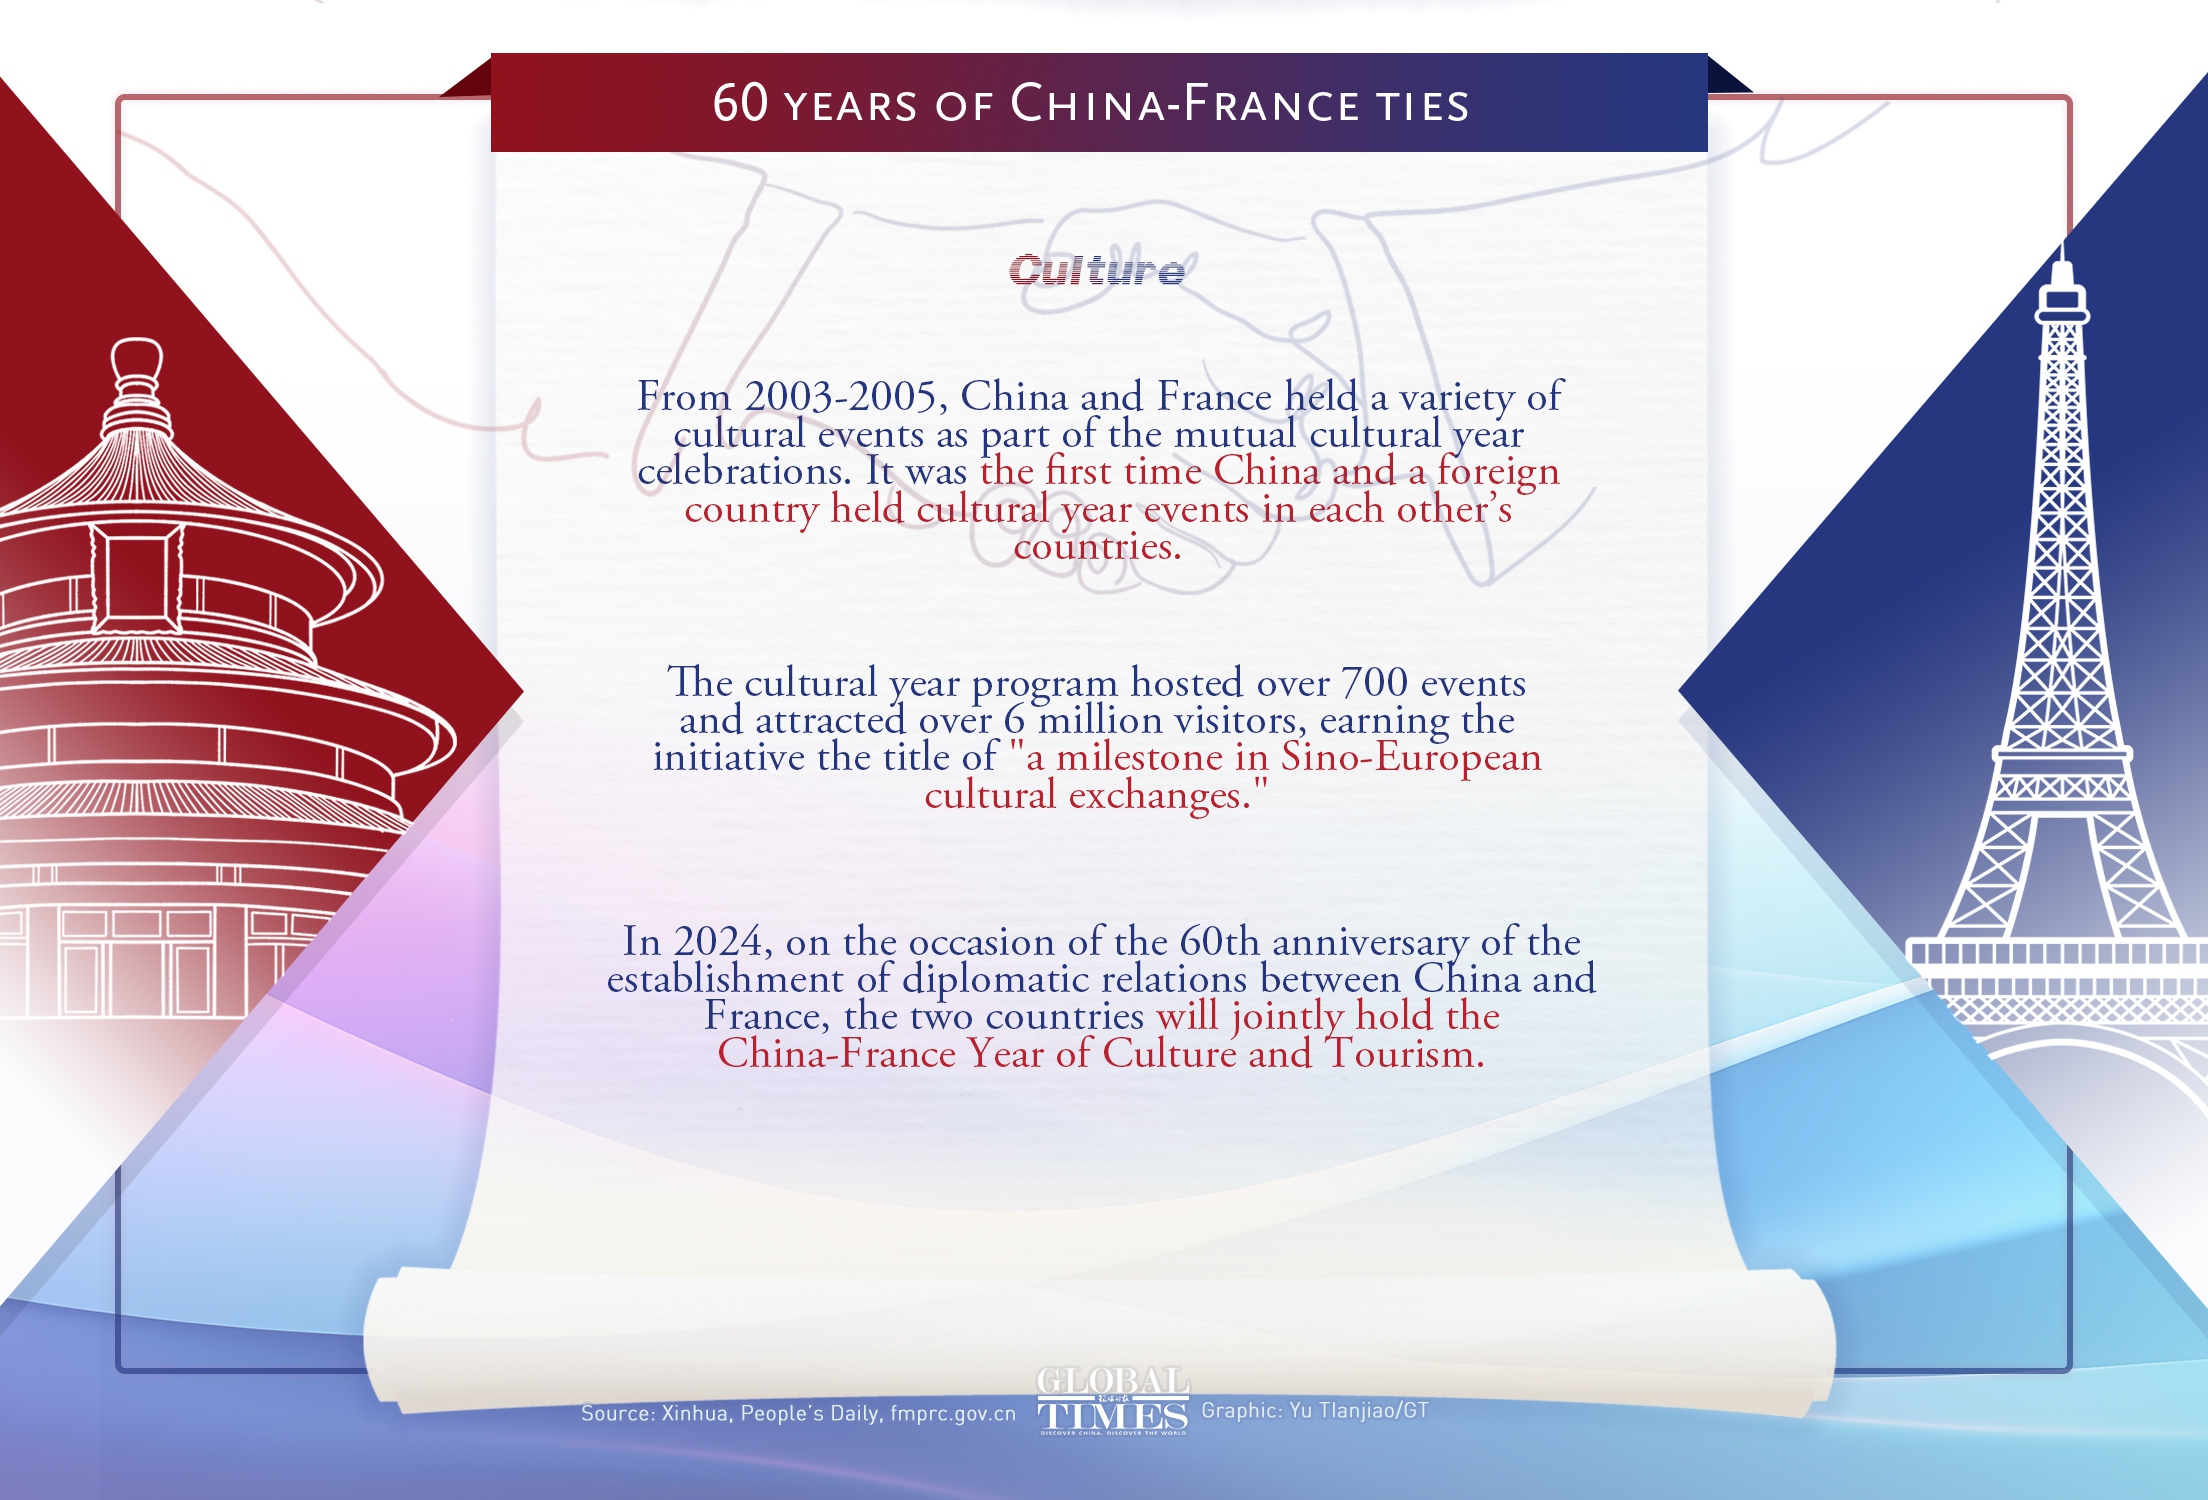 60 years ago today, China and France established diplomatic relations, making France the first major Western country to establish diplomatic ties with the People’s Republic of China. Over the decades, the two sides have maintained close cooperation and exchanges in diplomatic ties, economy, and culture. 